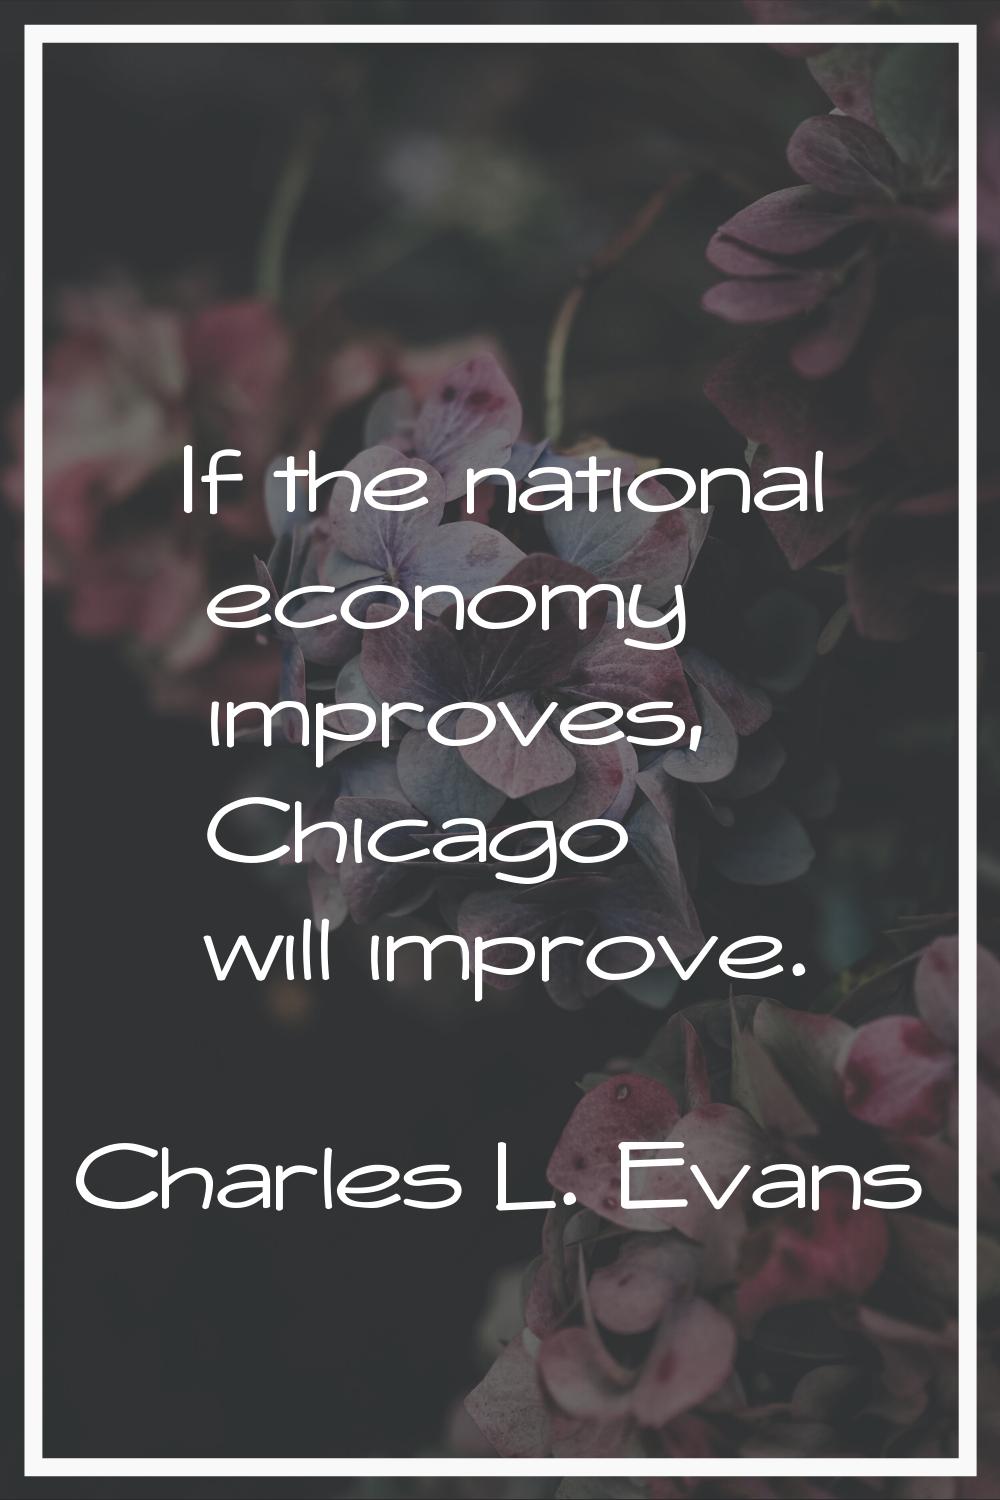 If the national economy improves, Chicago will improve.